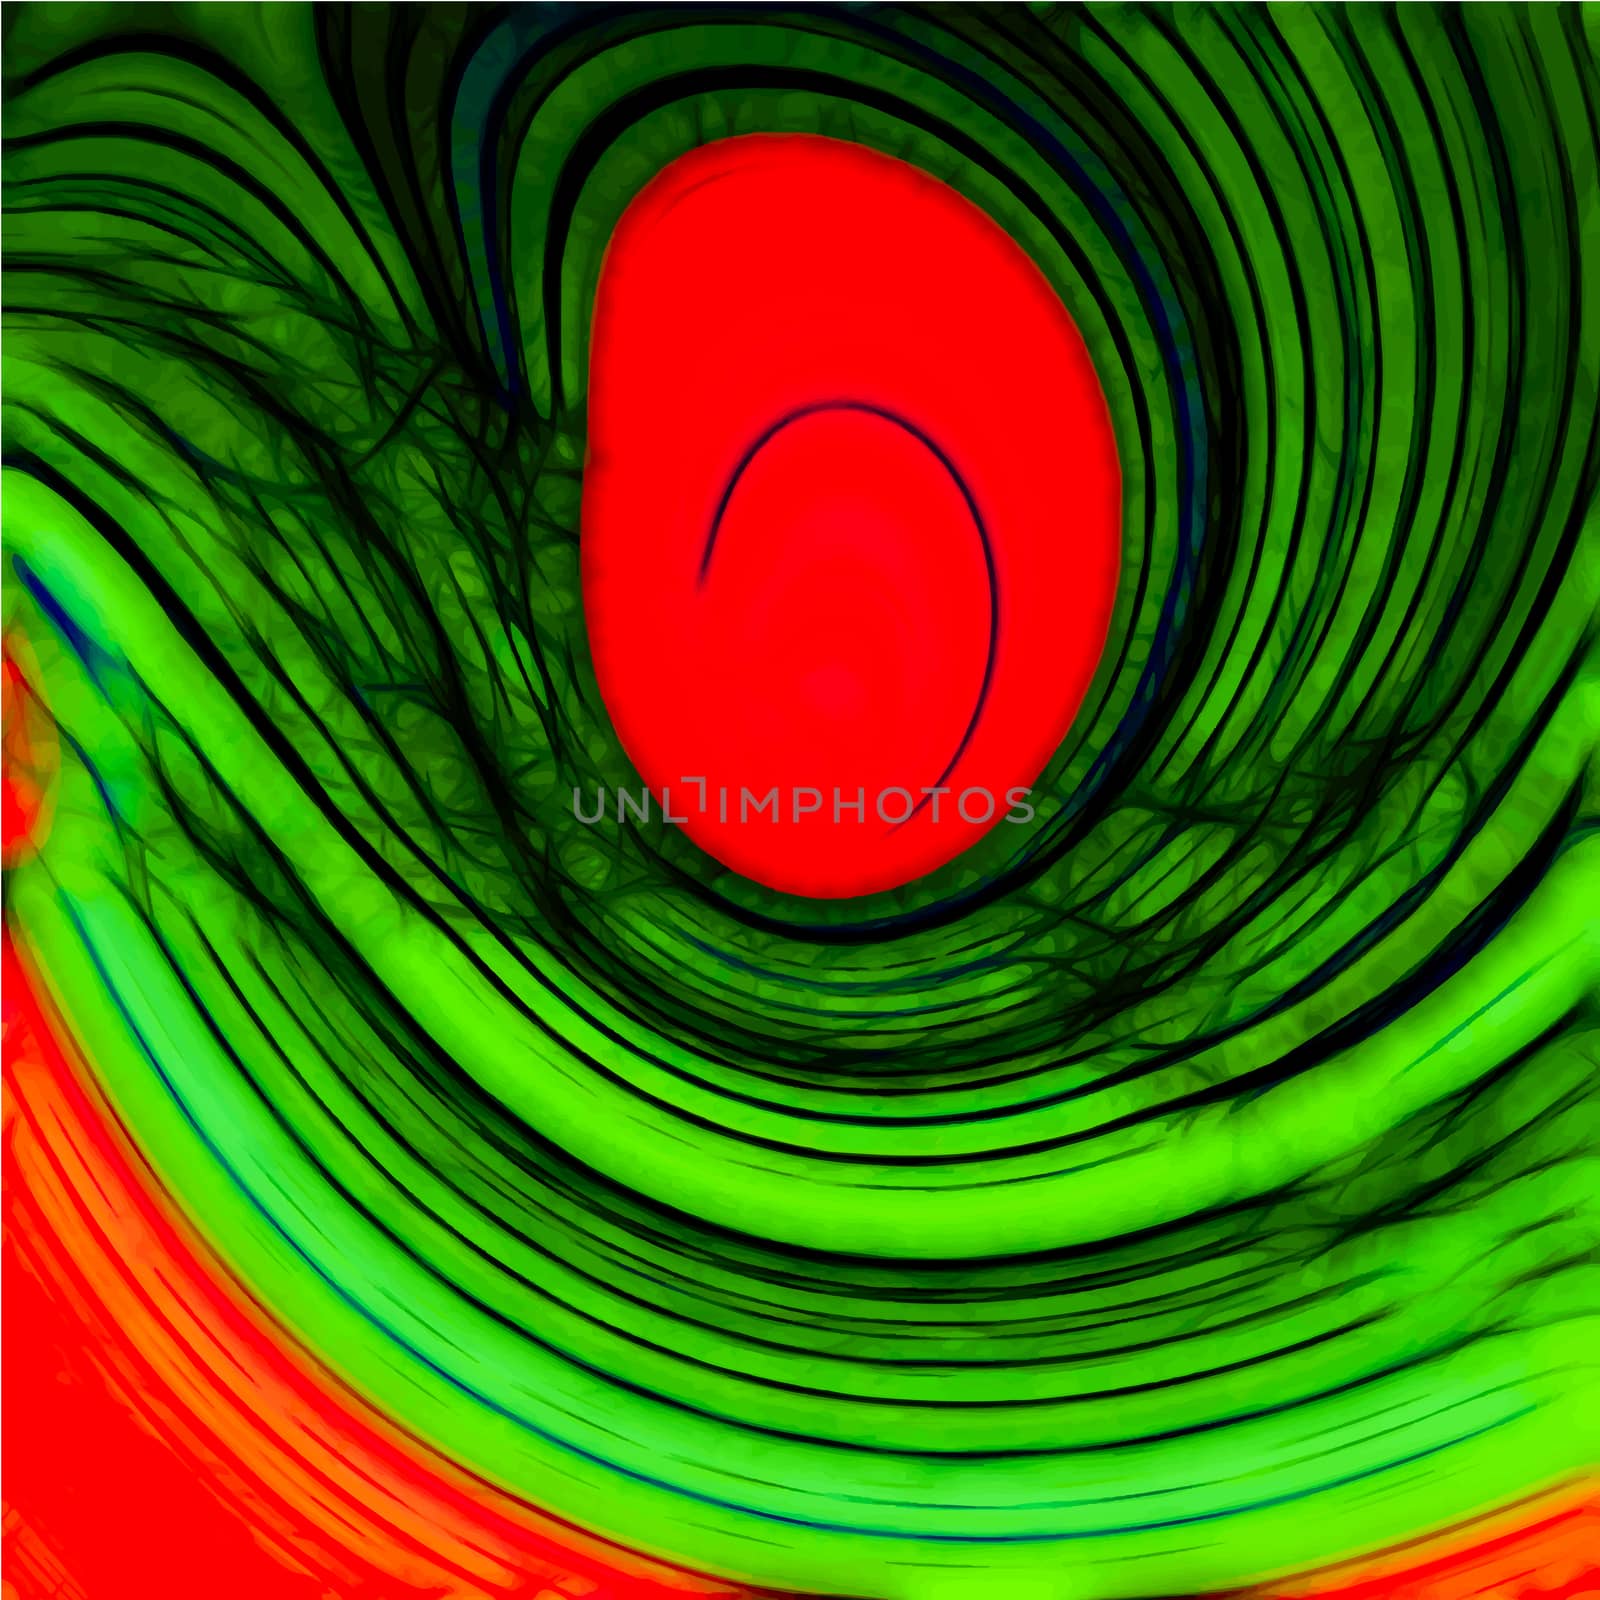 Abstract Green Background with Red Spot  -  Illustration by gstalker